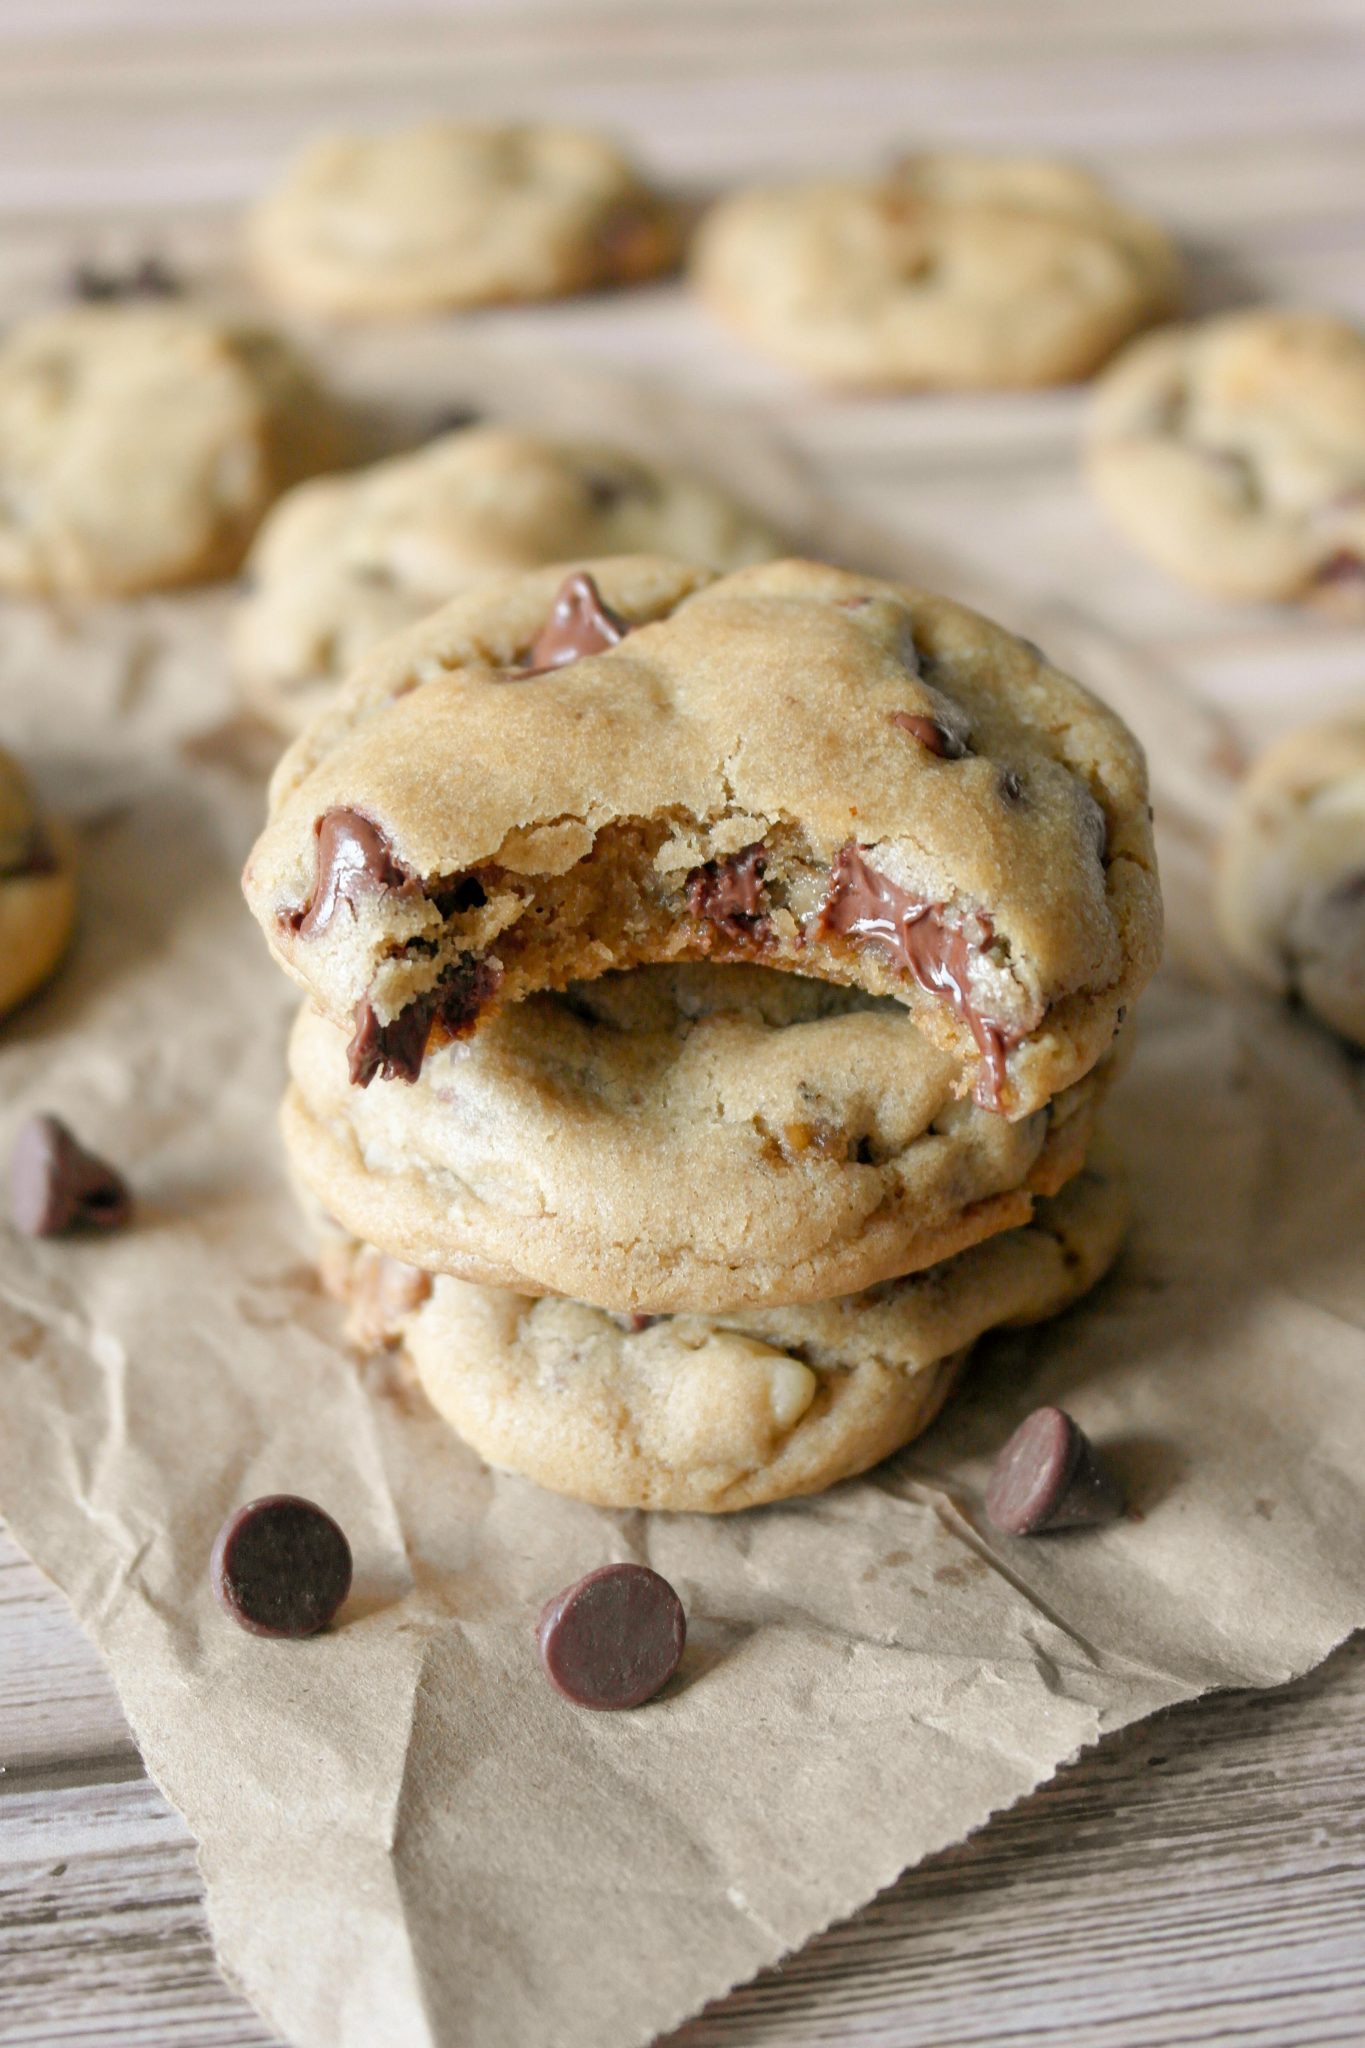 Chocolate Cookies Recipe
 15 of the Best Chocolate Chip Cookie Recipes The